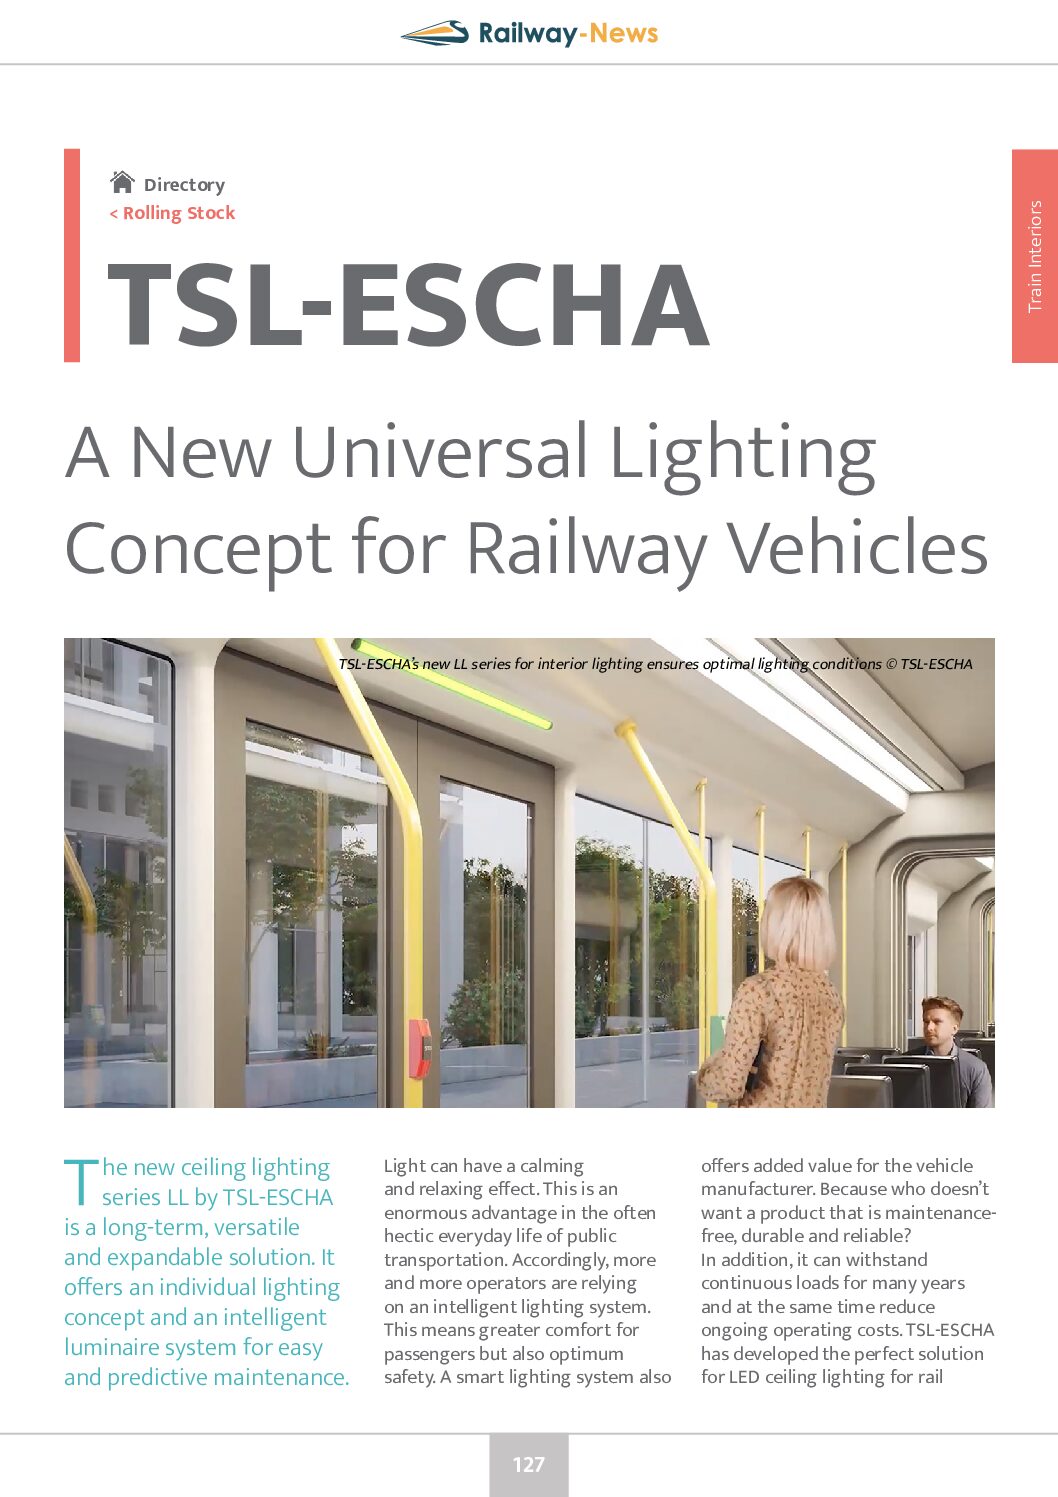 A New Universal Lighting Concept for Railway Vehicles